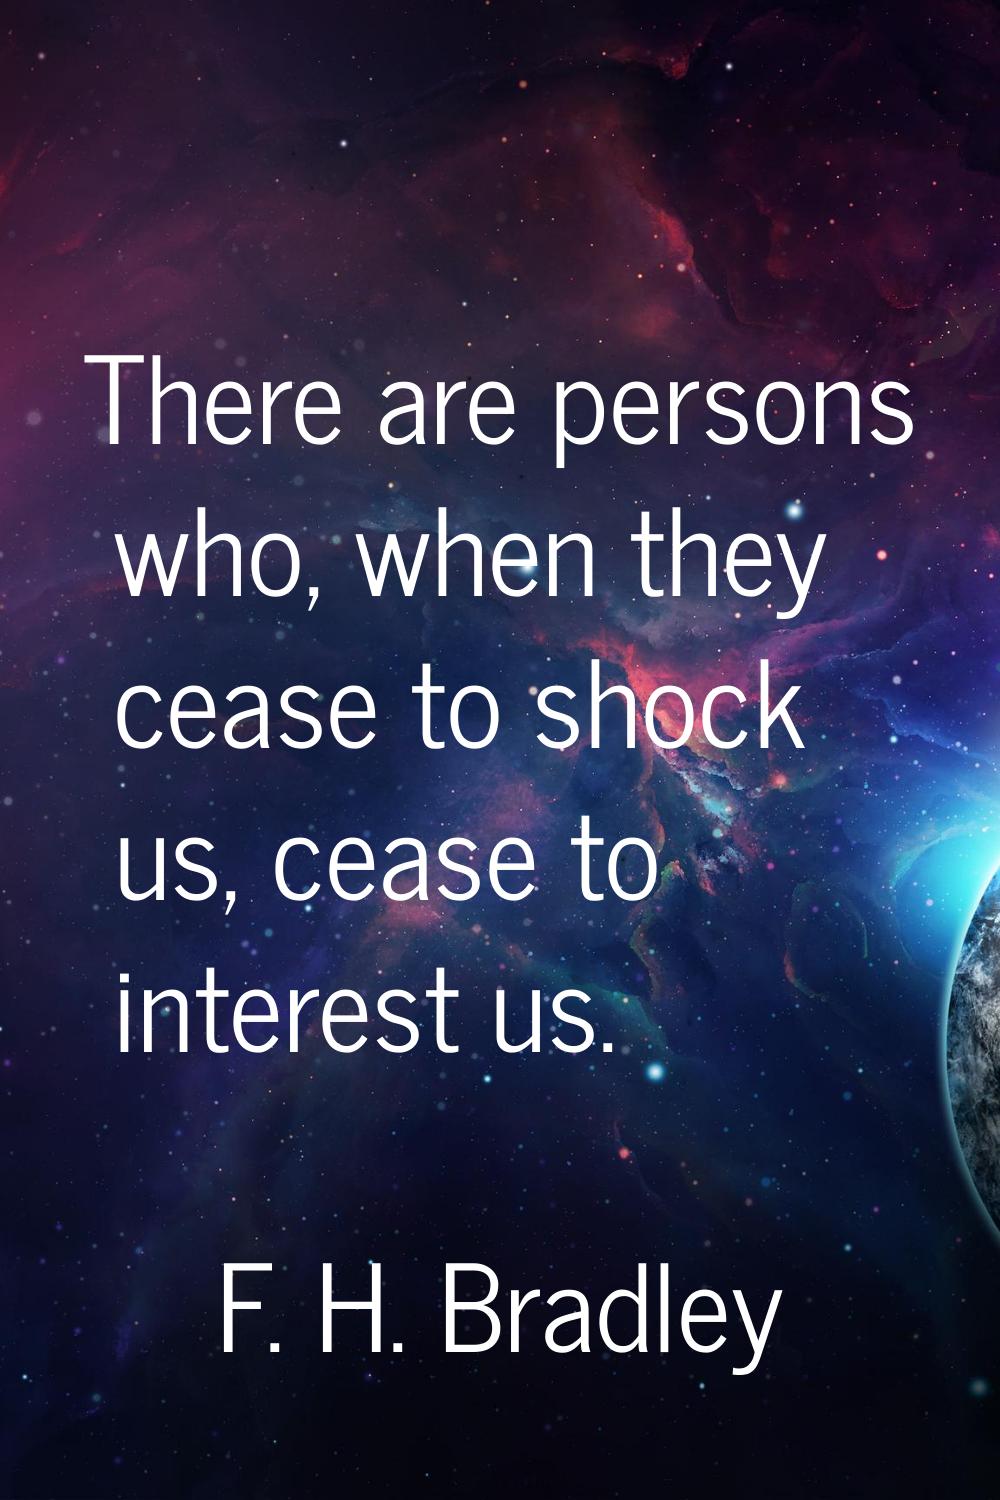 There are persons who, when they cease to shock us, cease to interest us.